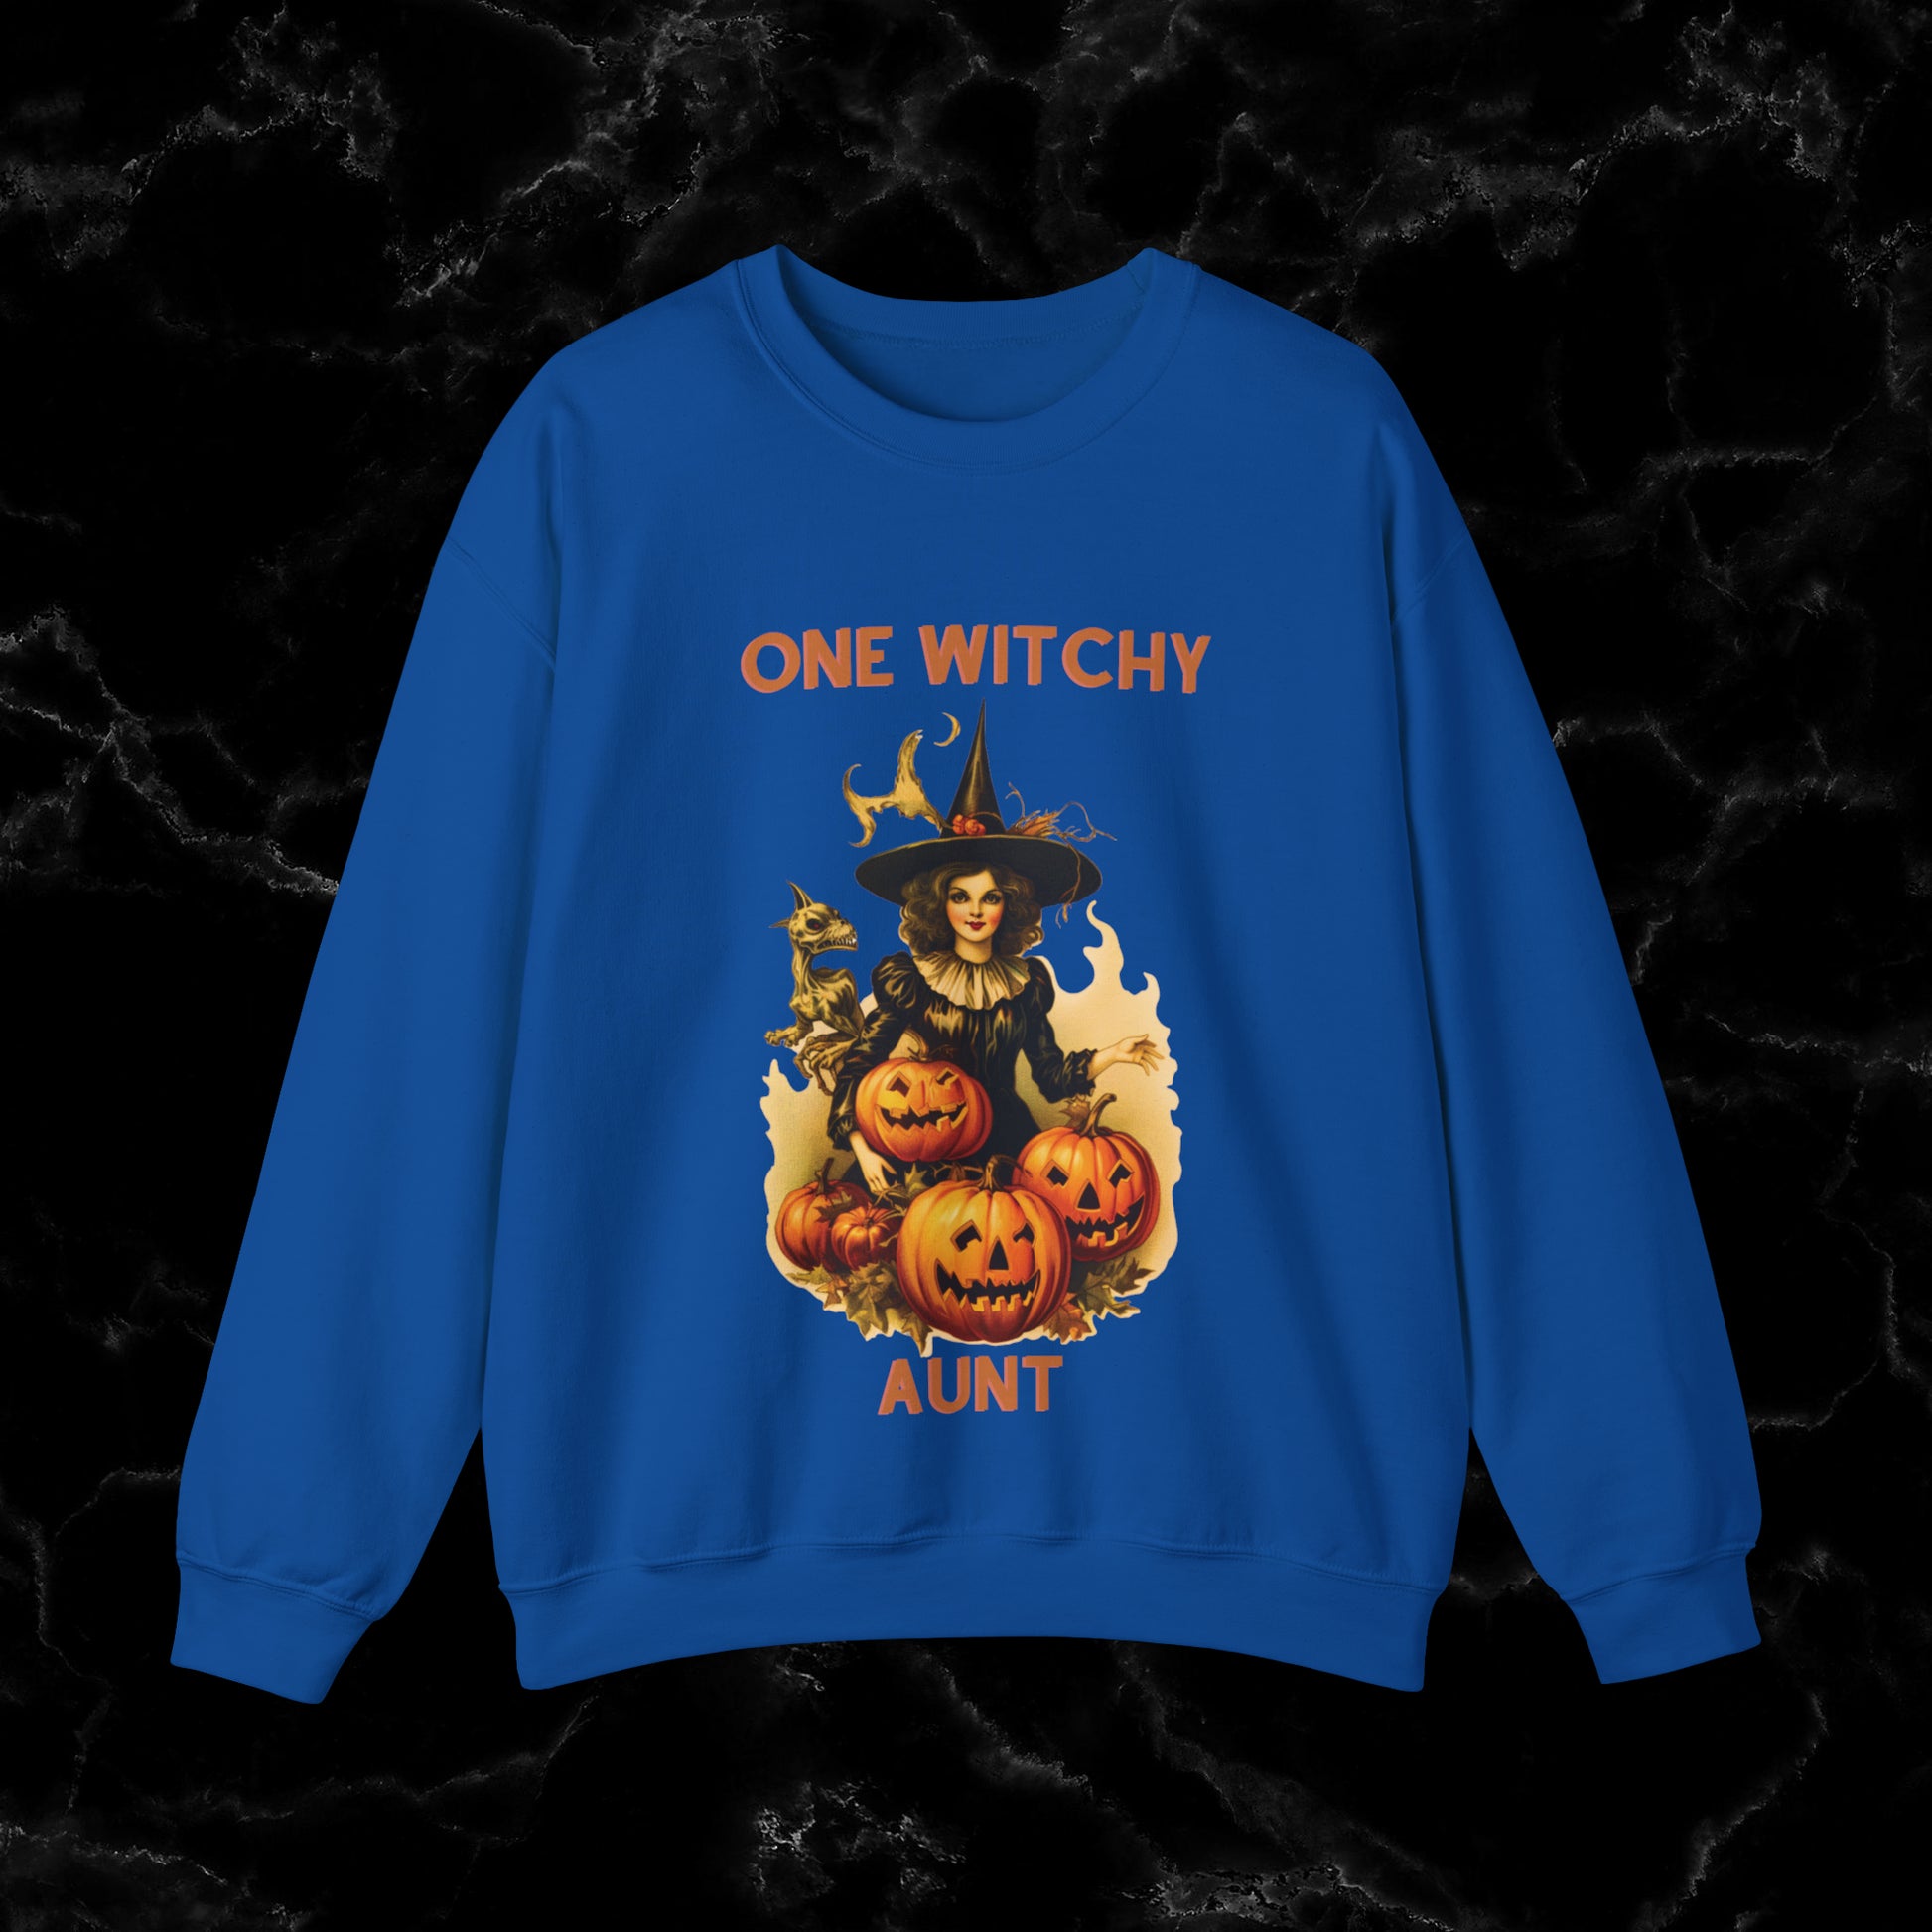 One Witchy Aunt Sweatshirt - Cool Aunt Shirt, Feral Aunt Sweatshirt, Perfect Gifts for Aunts, Auntie Sweatshirt Sweatshirt S Royal 